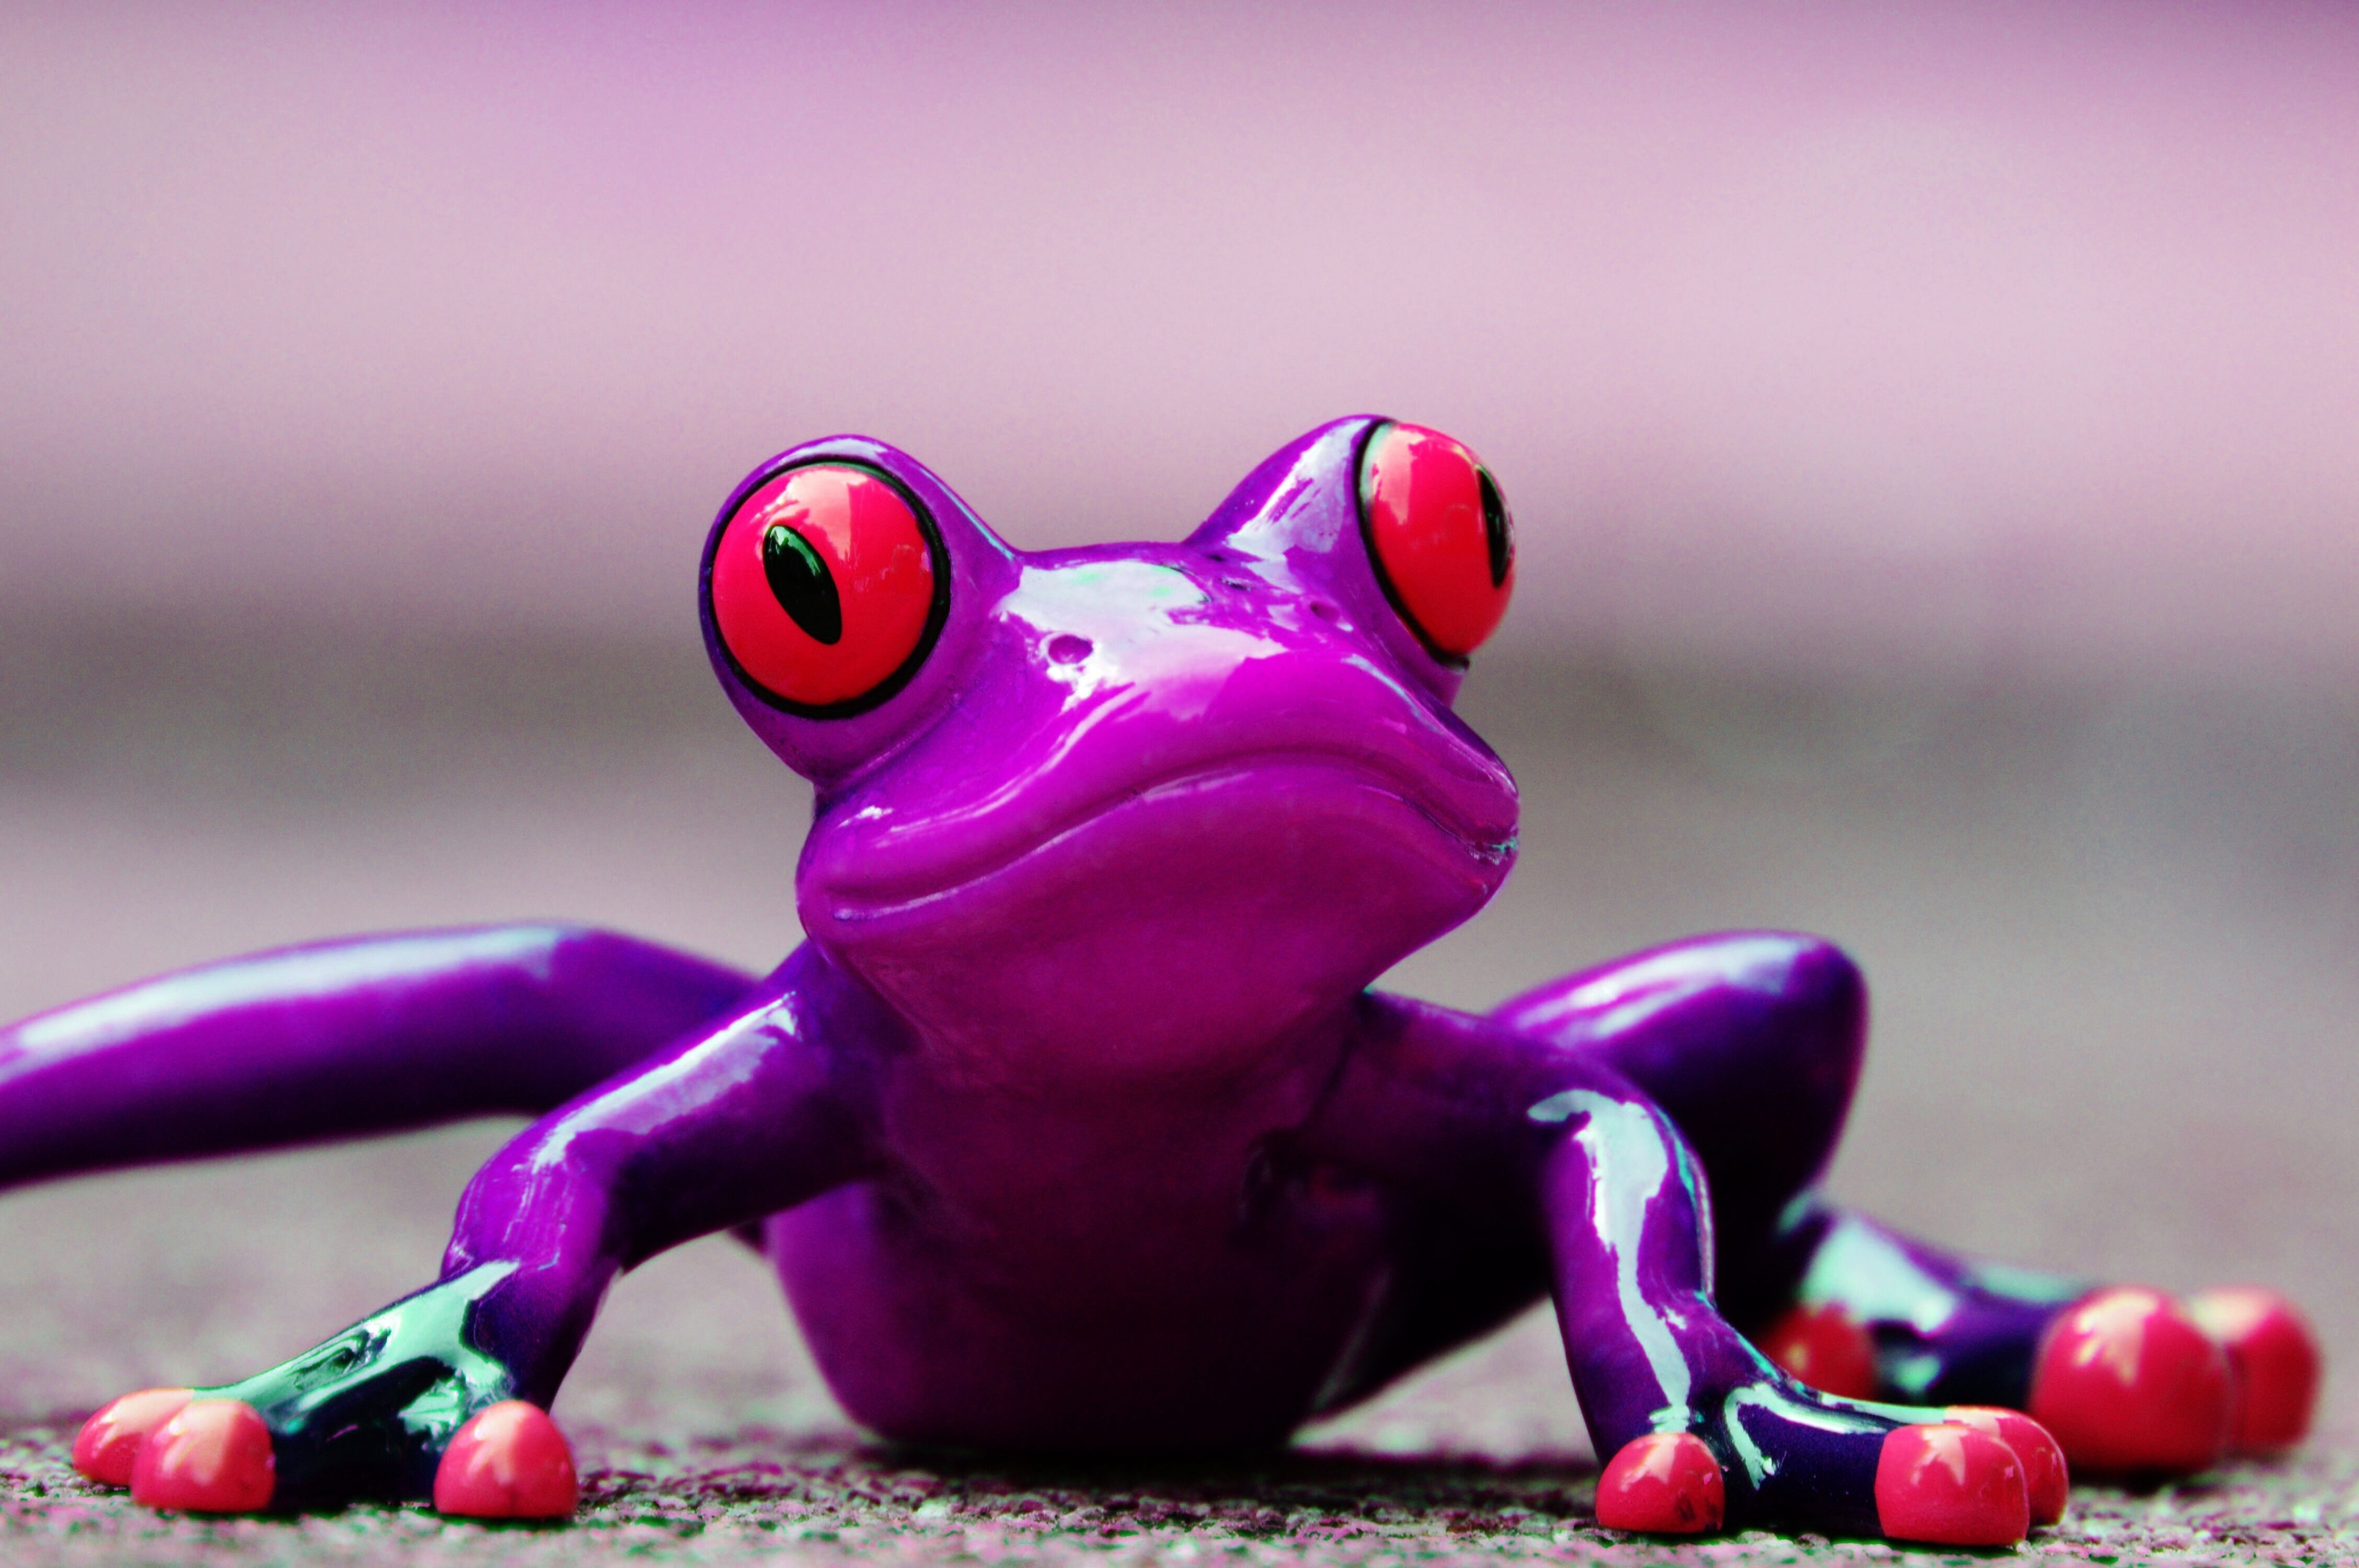 another word for purple tree frog